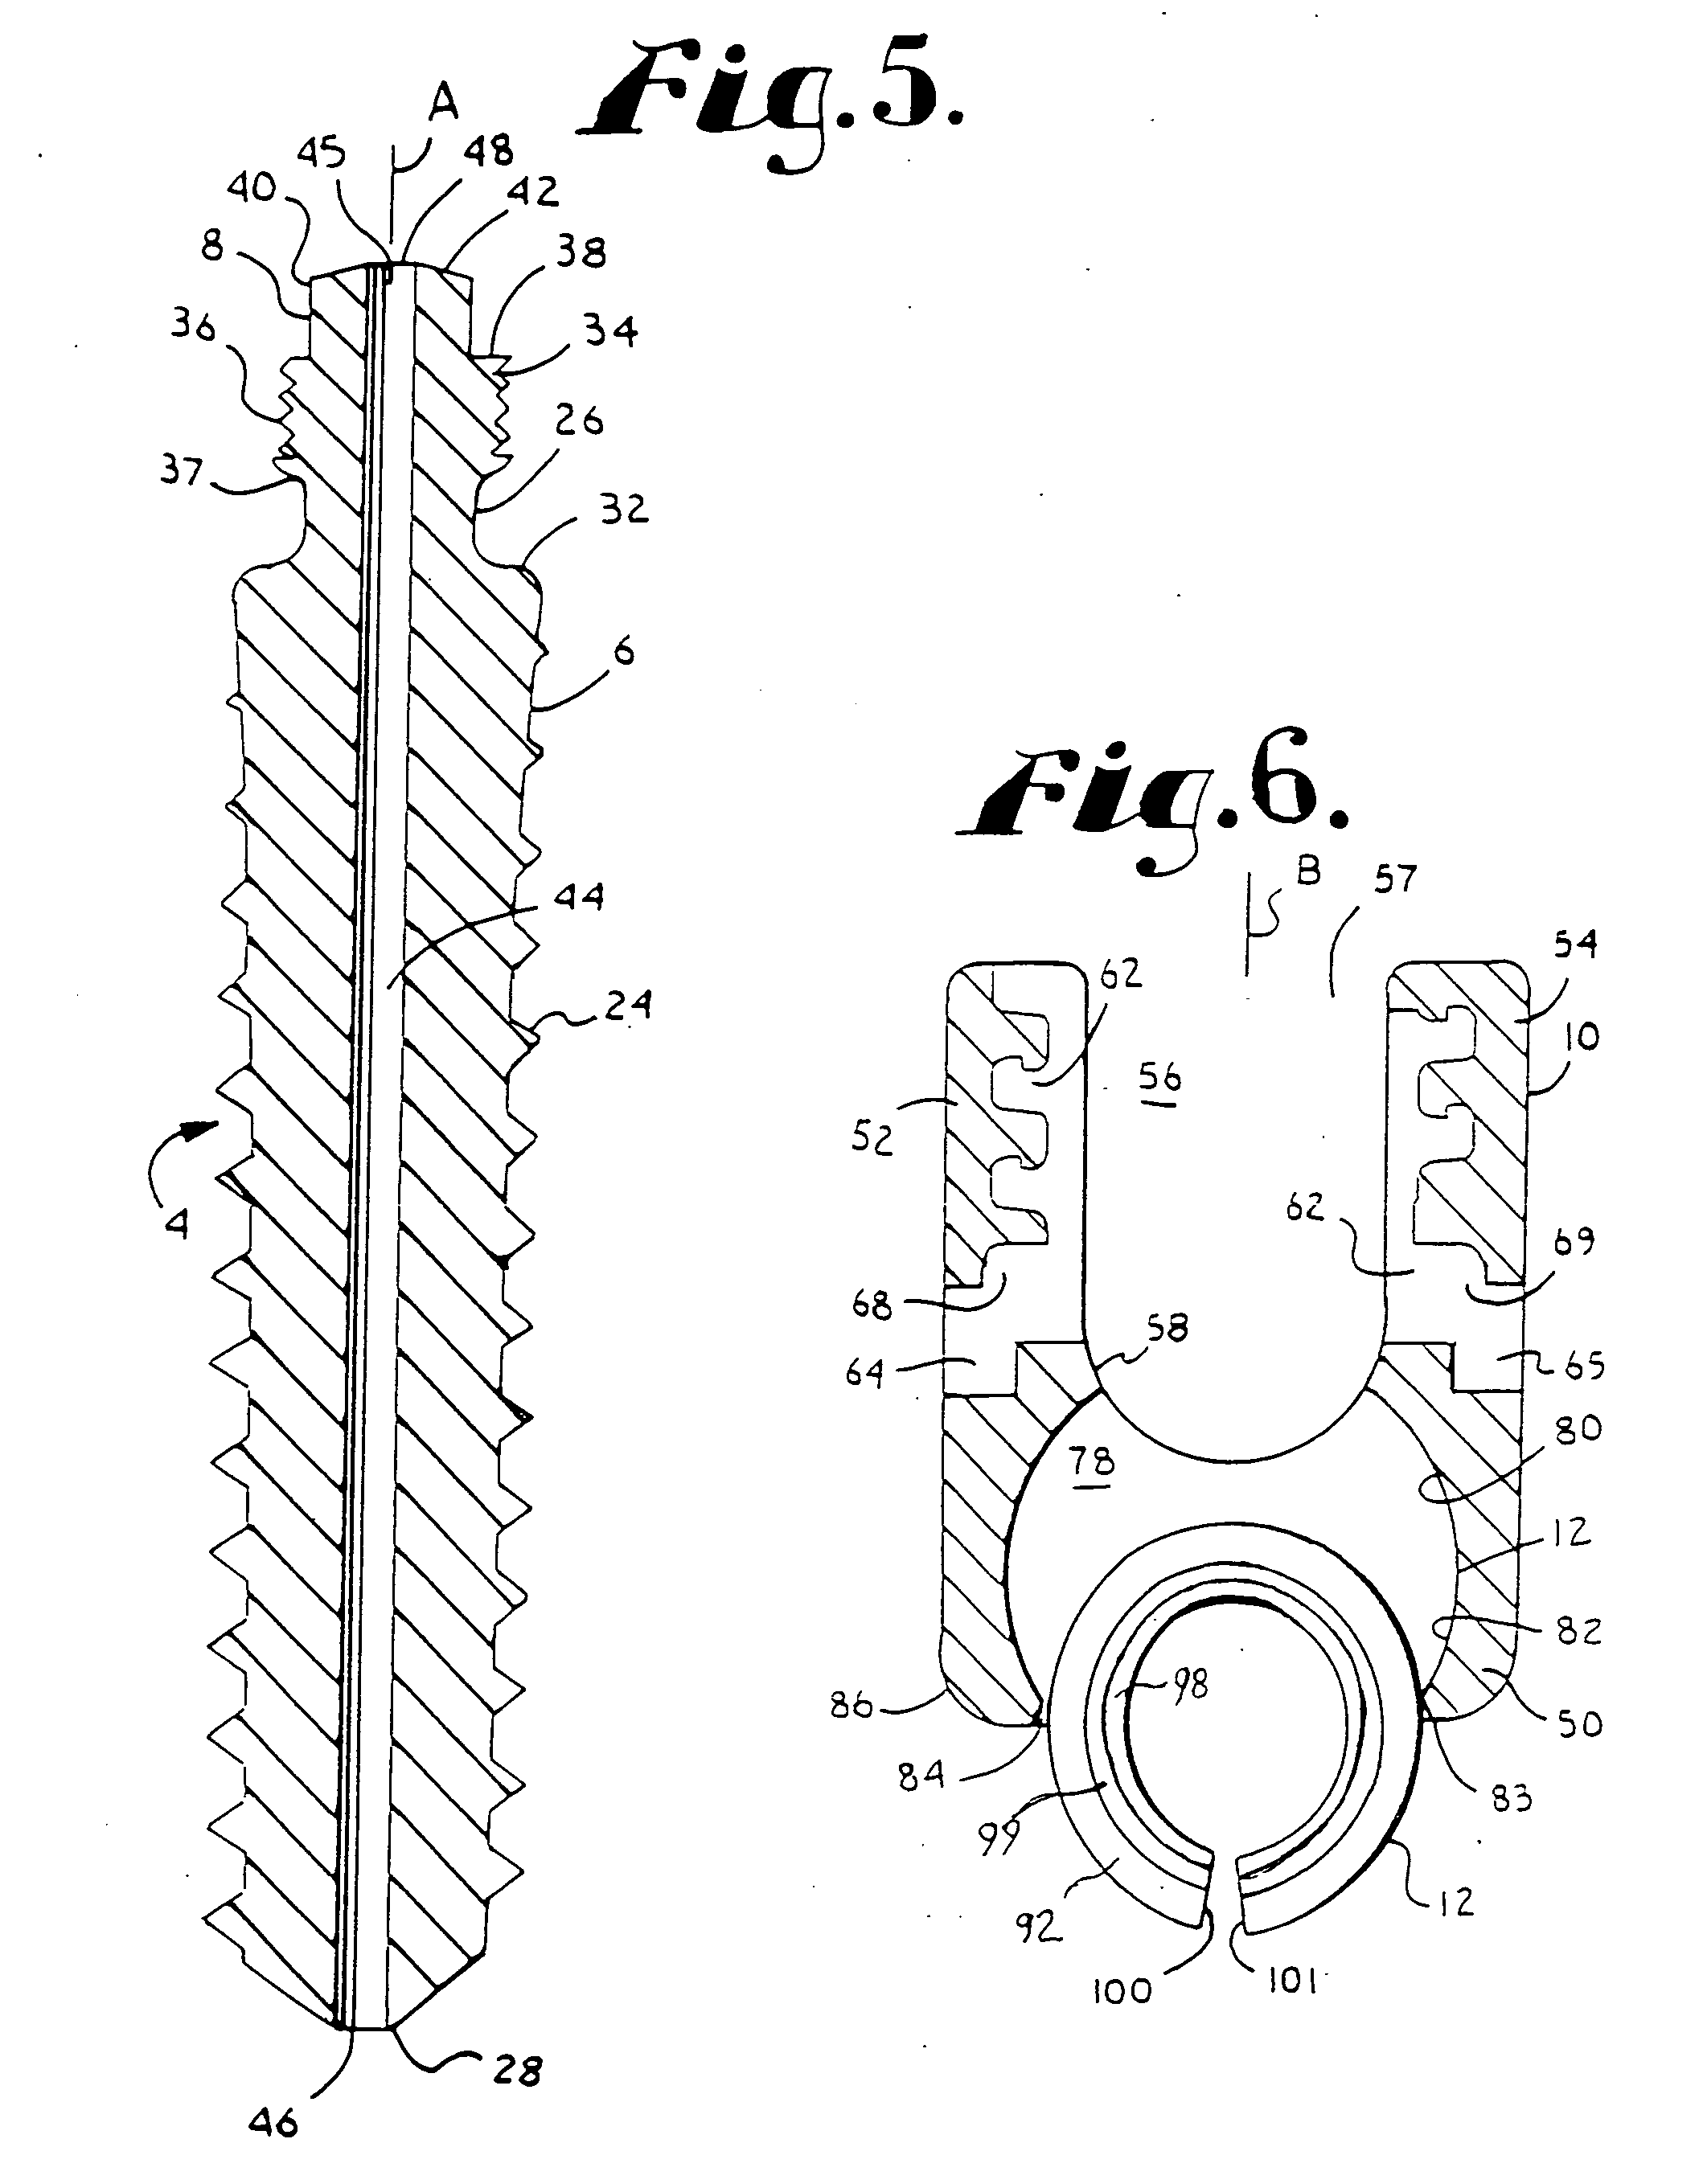 Polyaxial bone screw with discontinuous helically wound capture connection